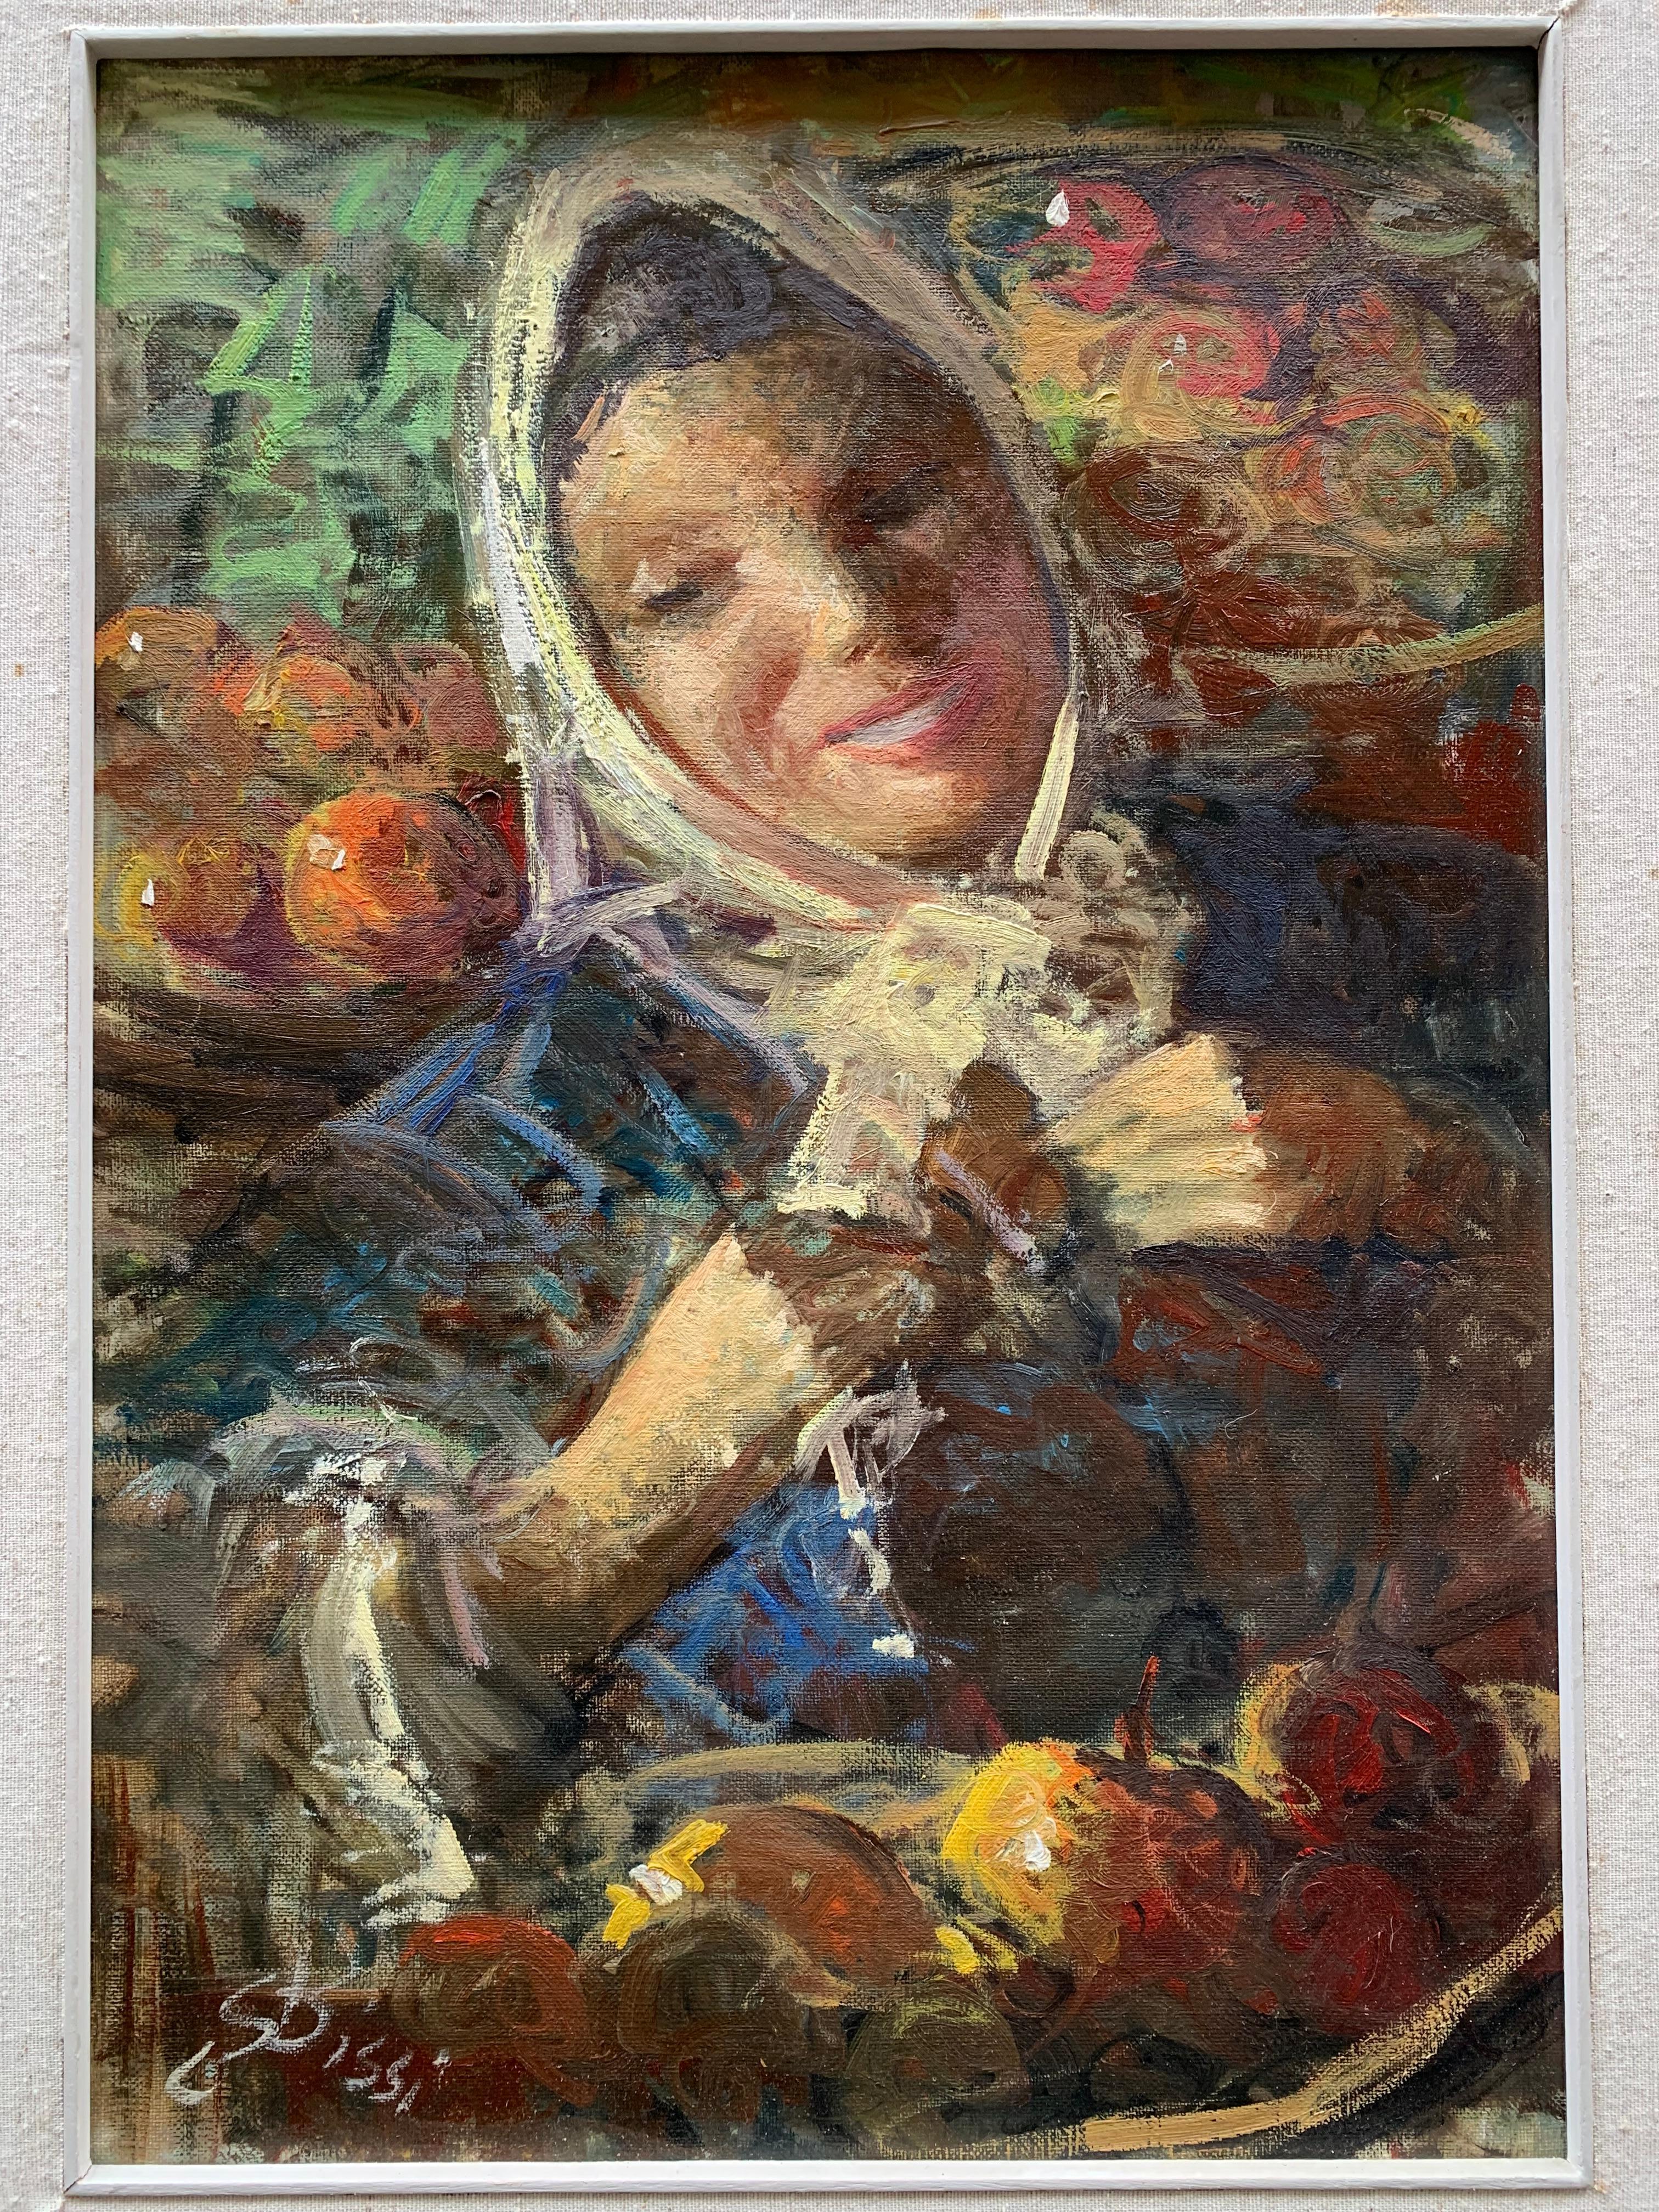 Sergio Cirni Bissi Figurative Painting - Girl with fruit. Market. Year 1958. Signed Sergio Cirno Bissi (1902 - 1987) 